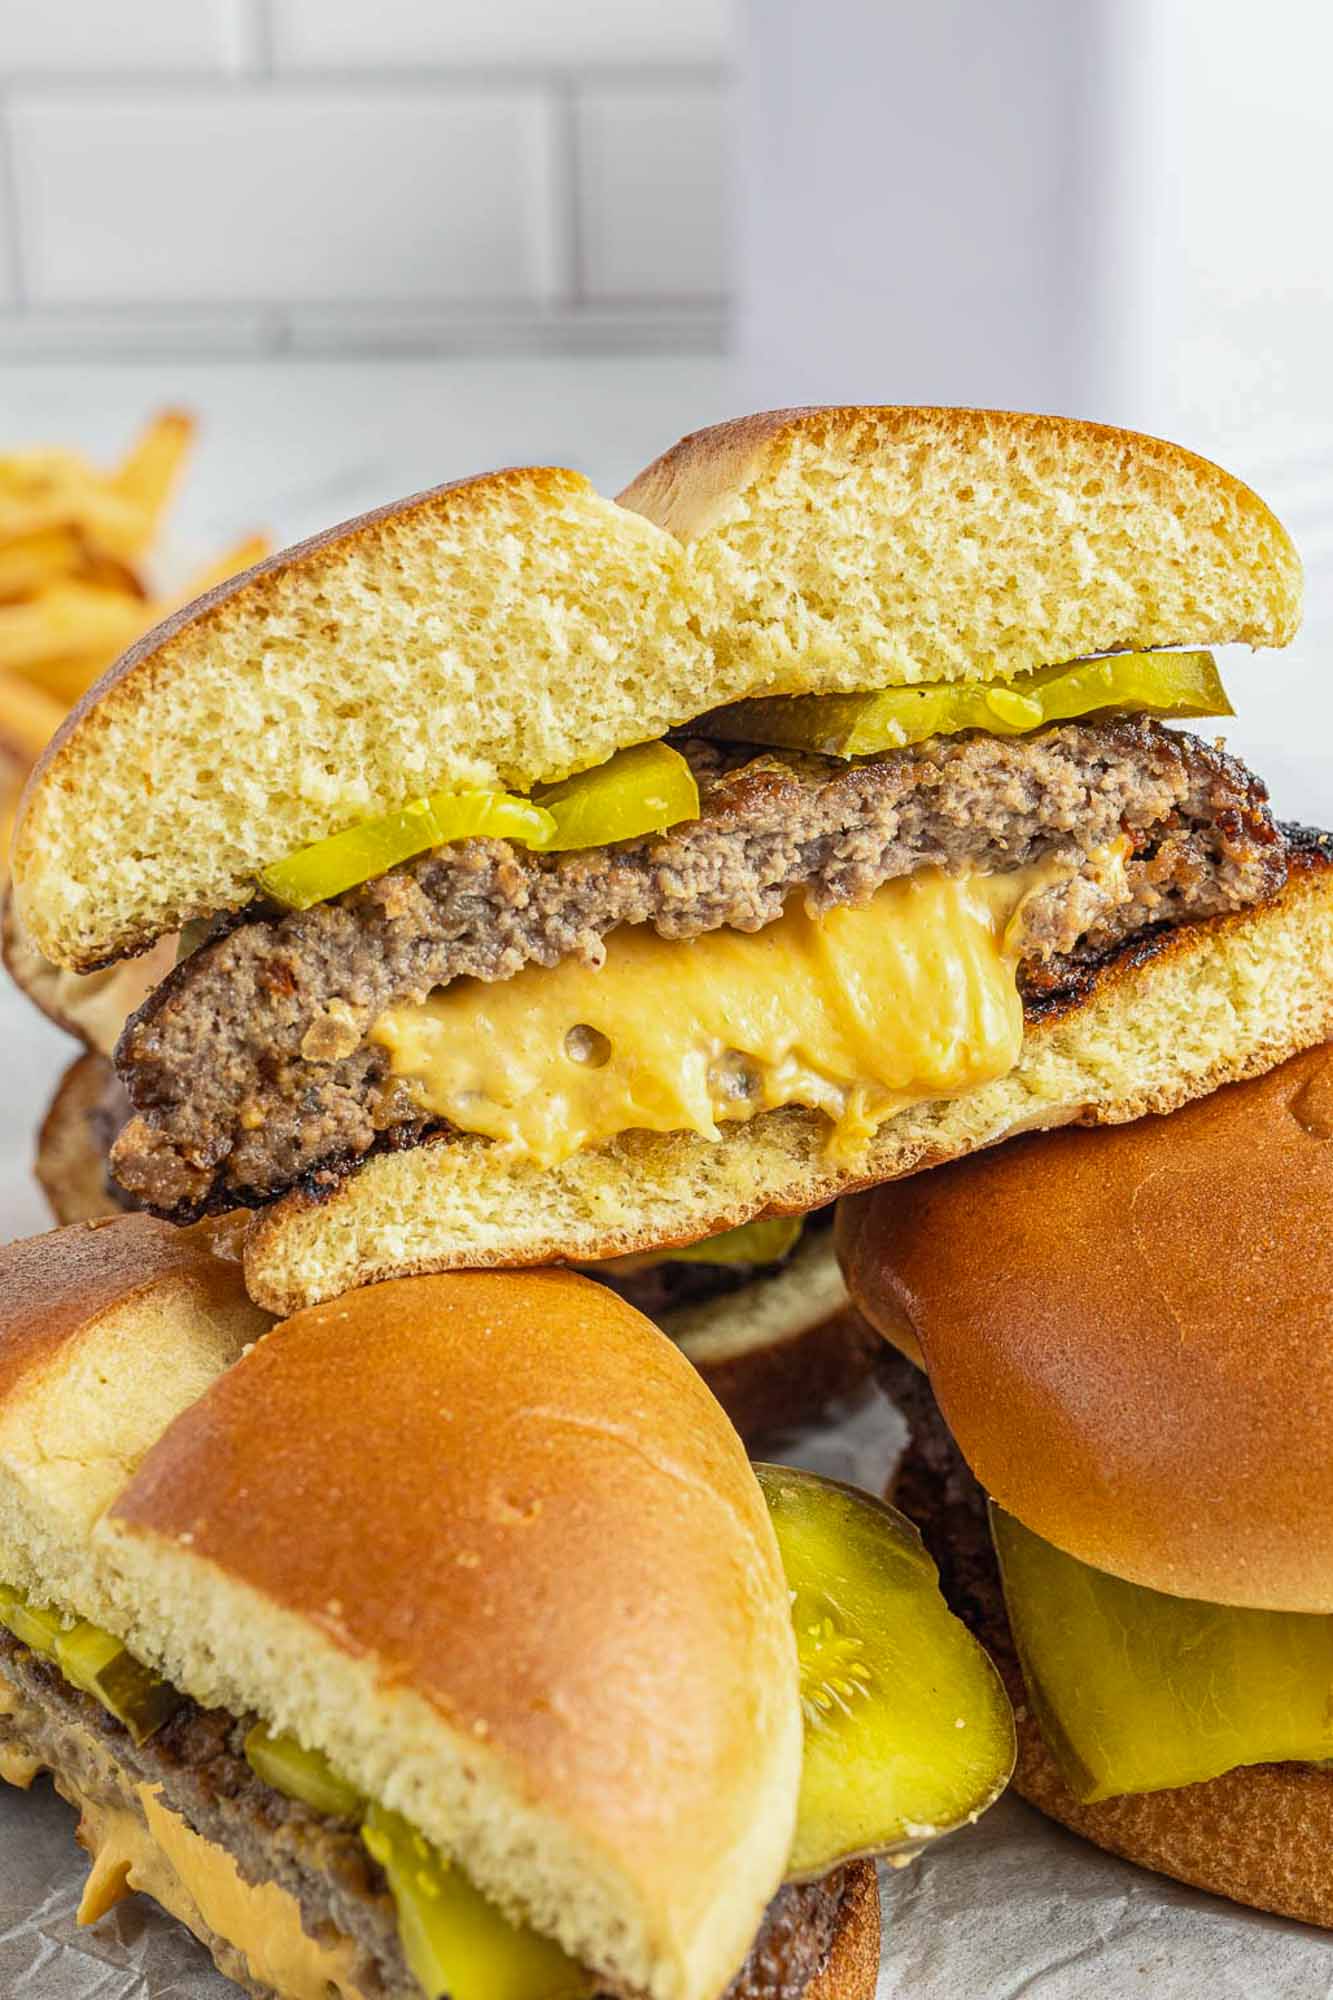 a juicy lucy hamburger on a bun stuffed with melty american cheese, sliced in half to show the texture.